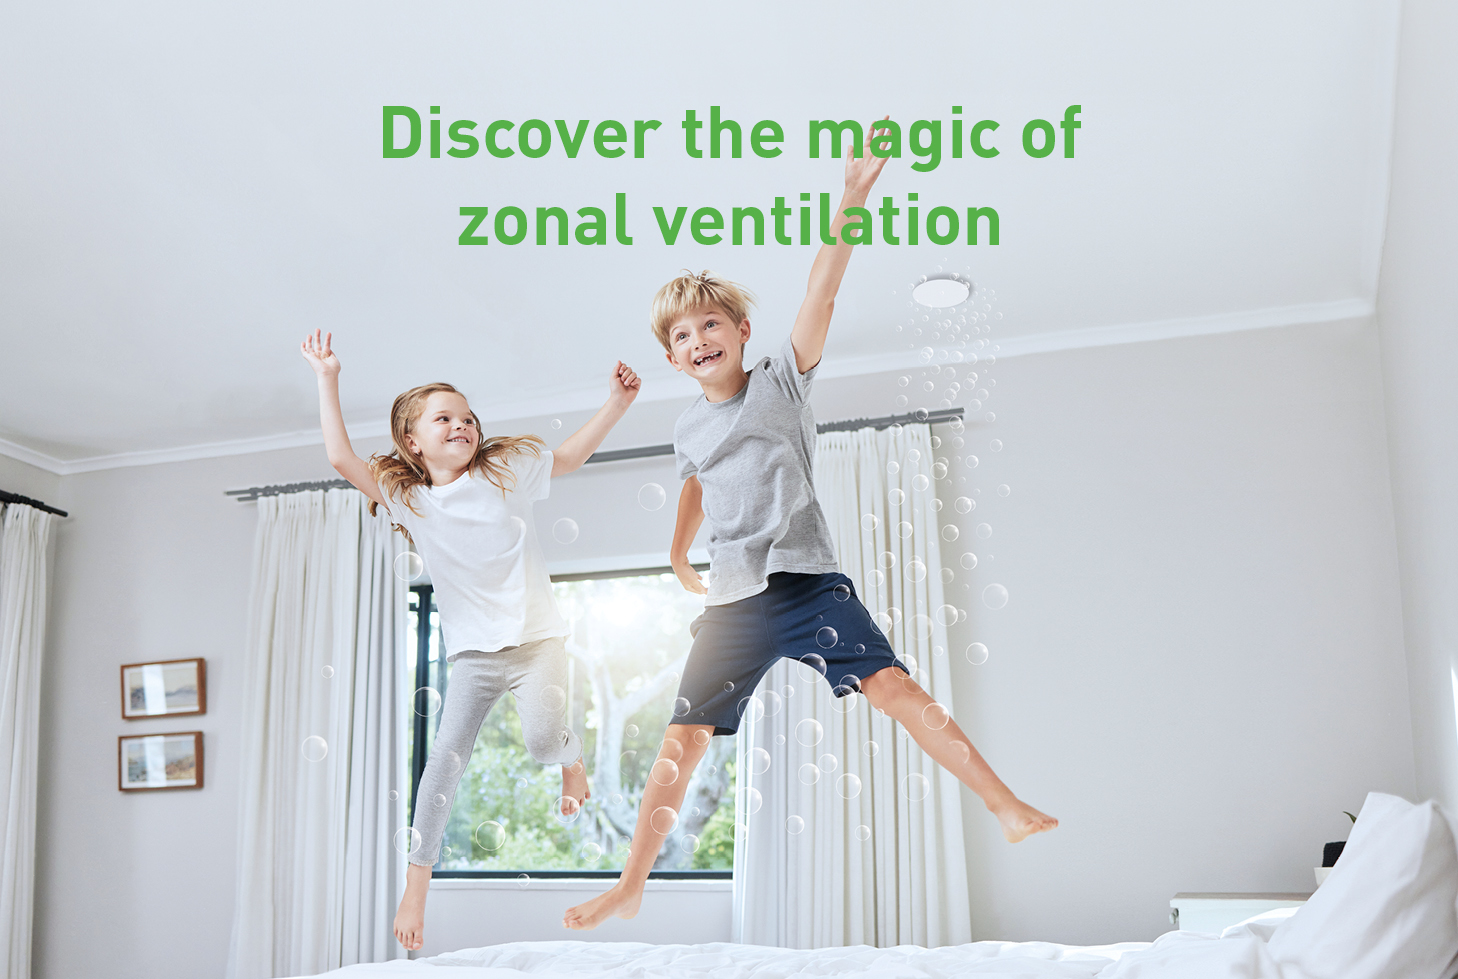 Zonal ventilation with DUCO - Children playing in a well-ventilated bedroom